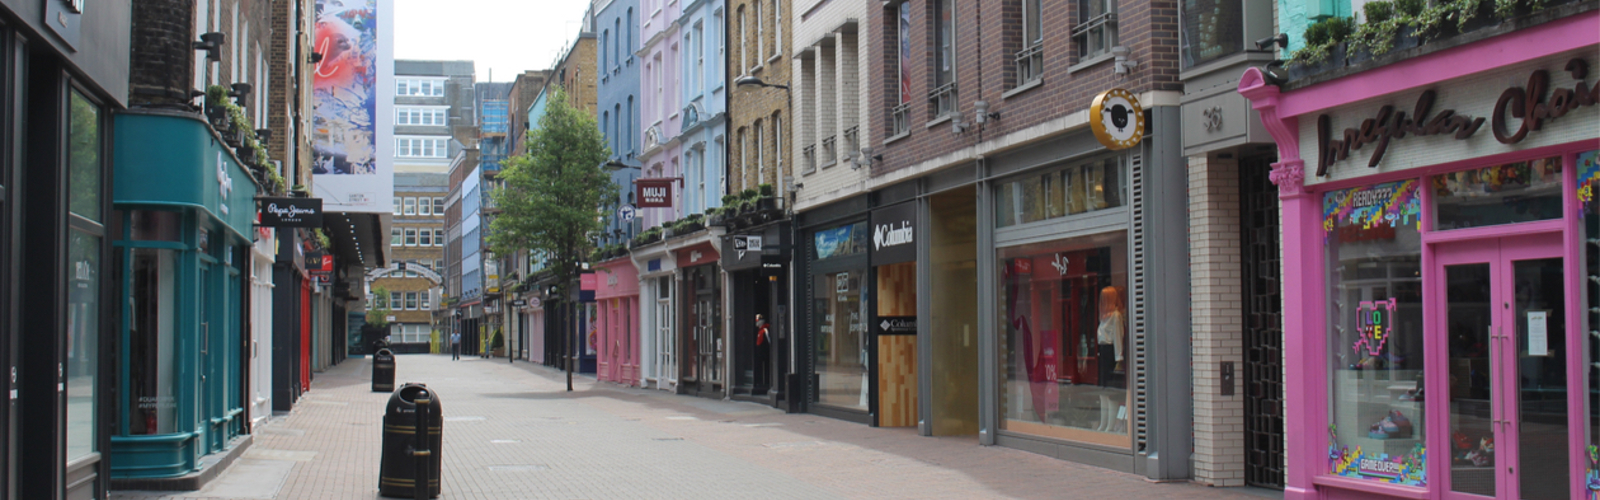 Carnaby Street, London, during the first lockdown of 2020